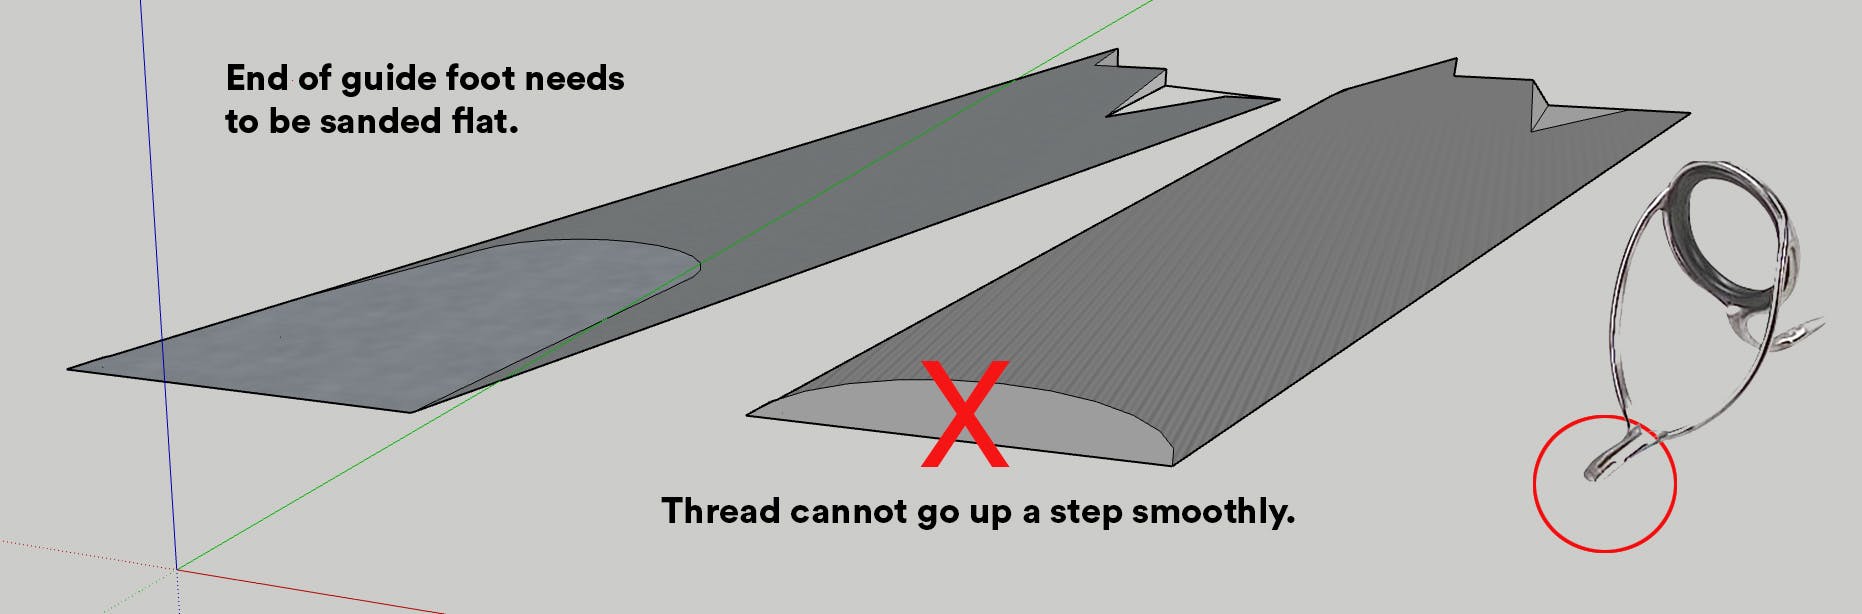 The graphic reads "End of guide foot needs to be sanded flat." and "Thread cannot go up a step smoothly."